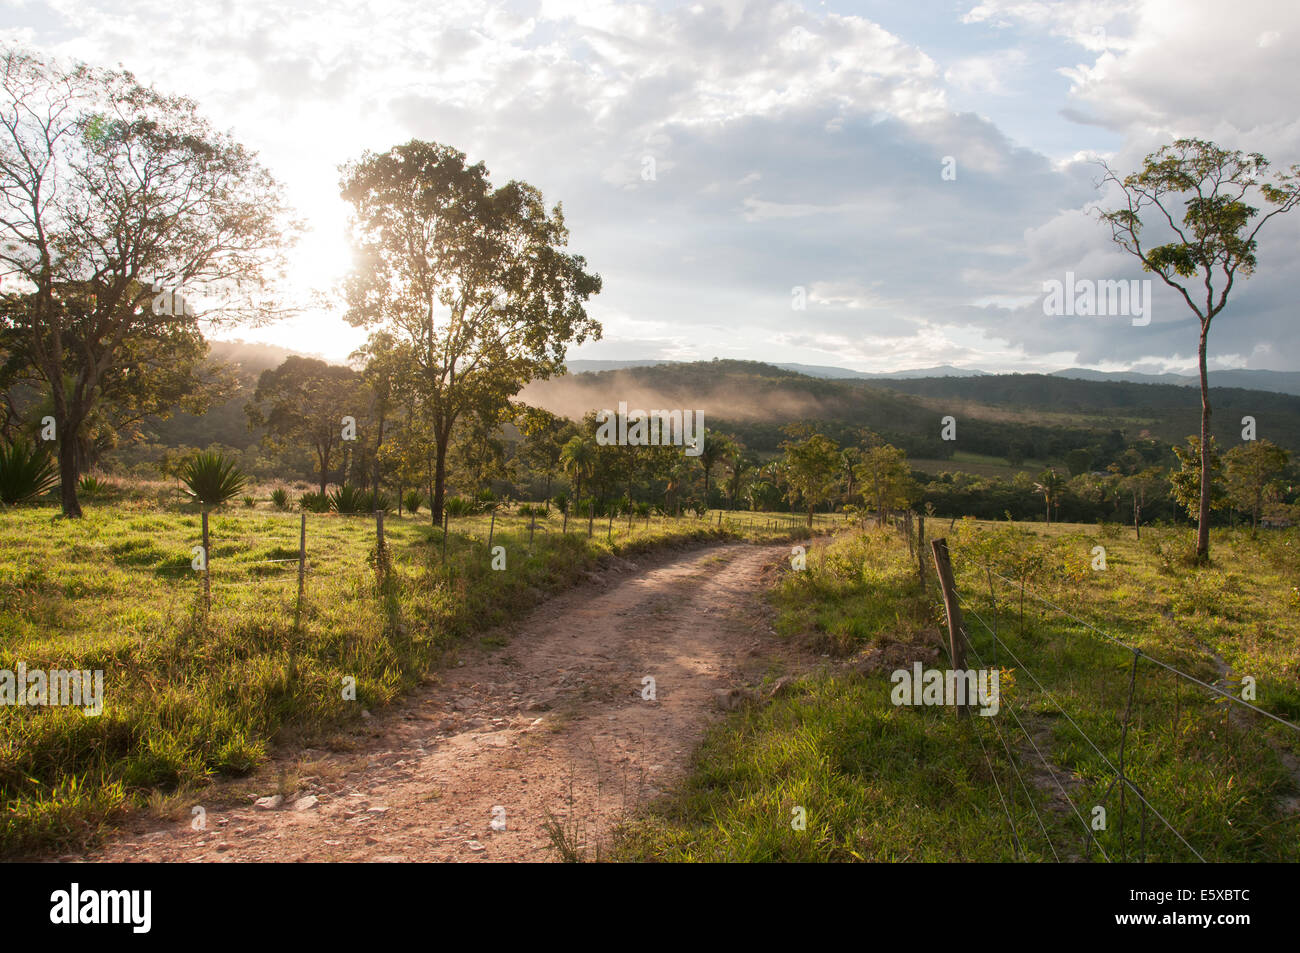 Road in the countryside Goiás state Brazil Stock Photo